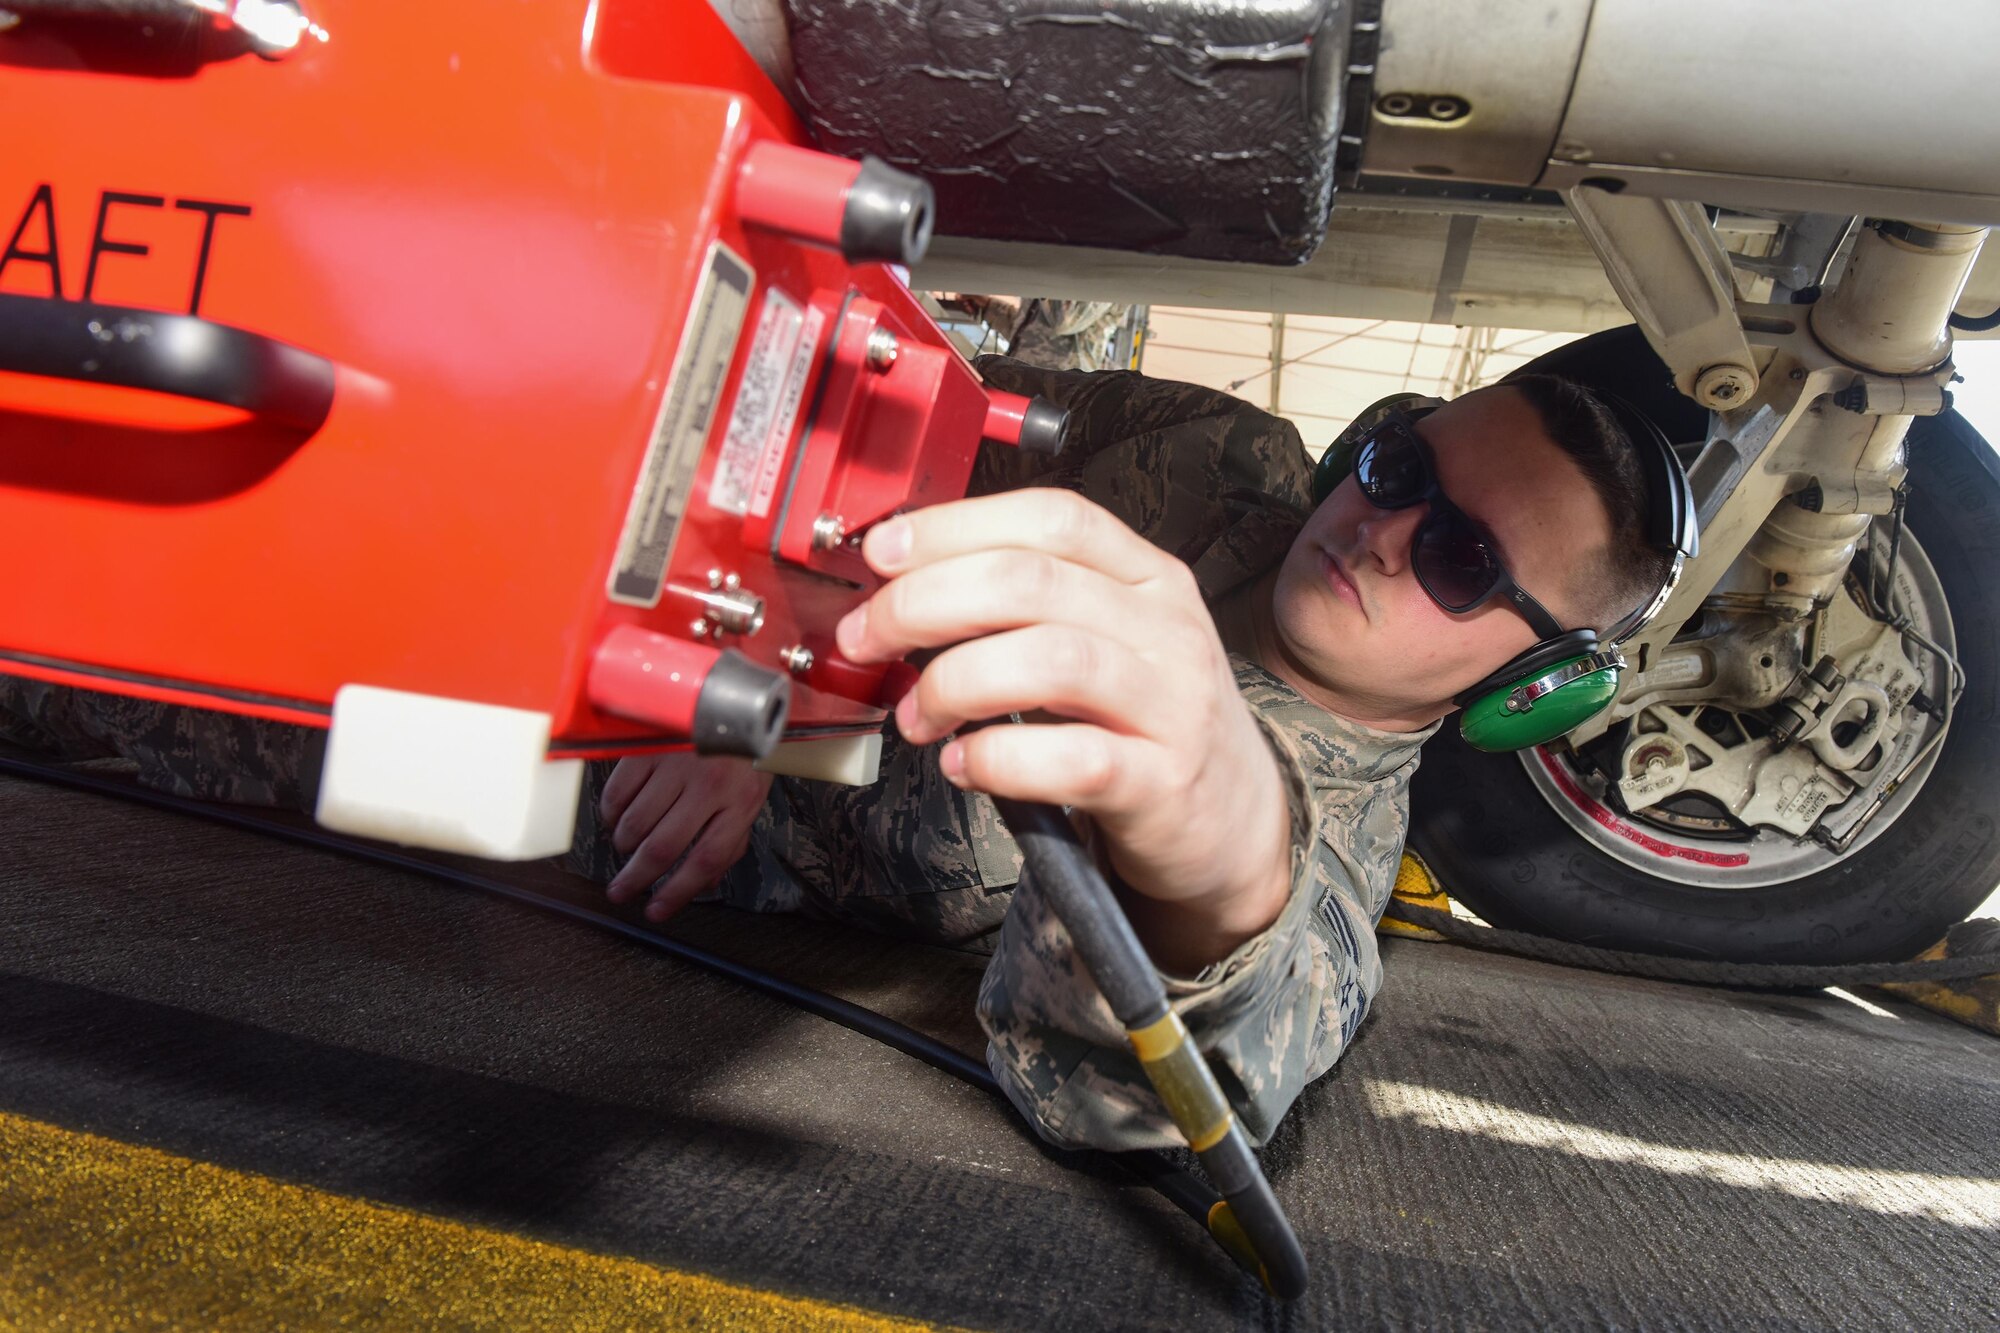 U.S. Air Force Senior Airman Brock Latham, inspector from the 16th Electronic Warfare Squadron at Eglin Air Force Base, Fla., removes a testing device from one of the South Carolina Air National Guard’s F-16 Fighting Falcons at McEntire Joint National Guard Base, Jan. 18, 2017. The electronic warfare systems used on S.C. Air National Guard F-16 Fighting Falcons underwent an annual Combat Shield inspection; ensuring testing and maintenance requirements are properly conducted.   (U.S. Air National Guard photo by Airman 1st Class Megan Floyd)